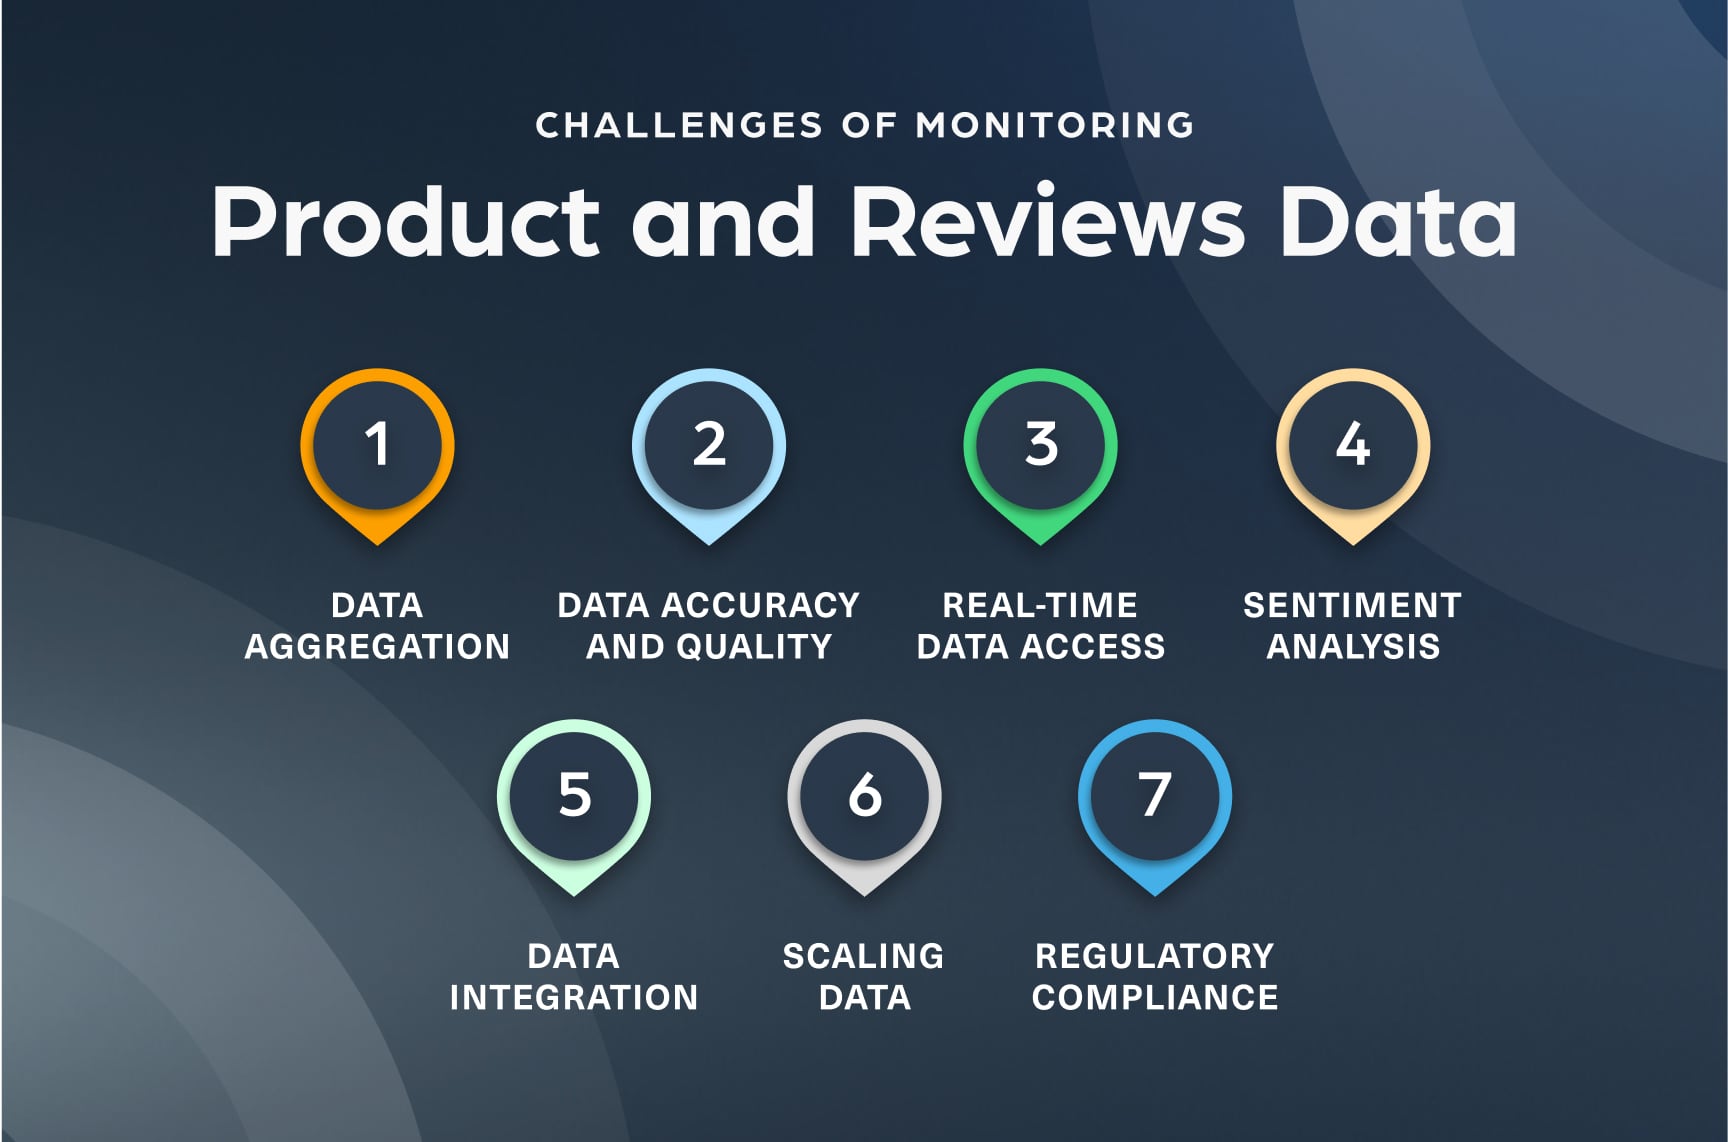 The challenges of monitoring product and reviews data